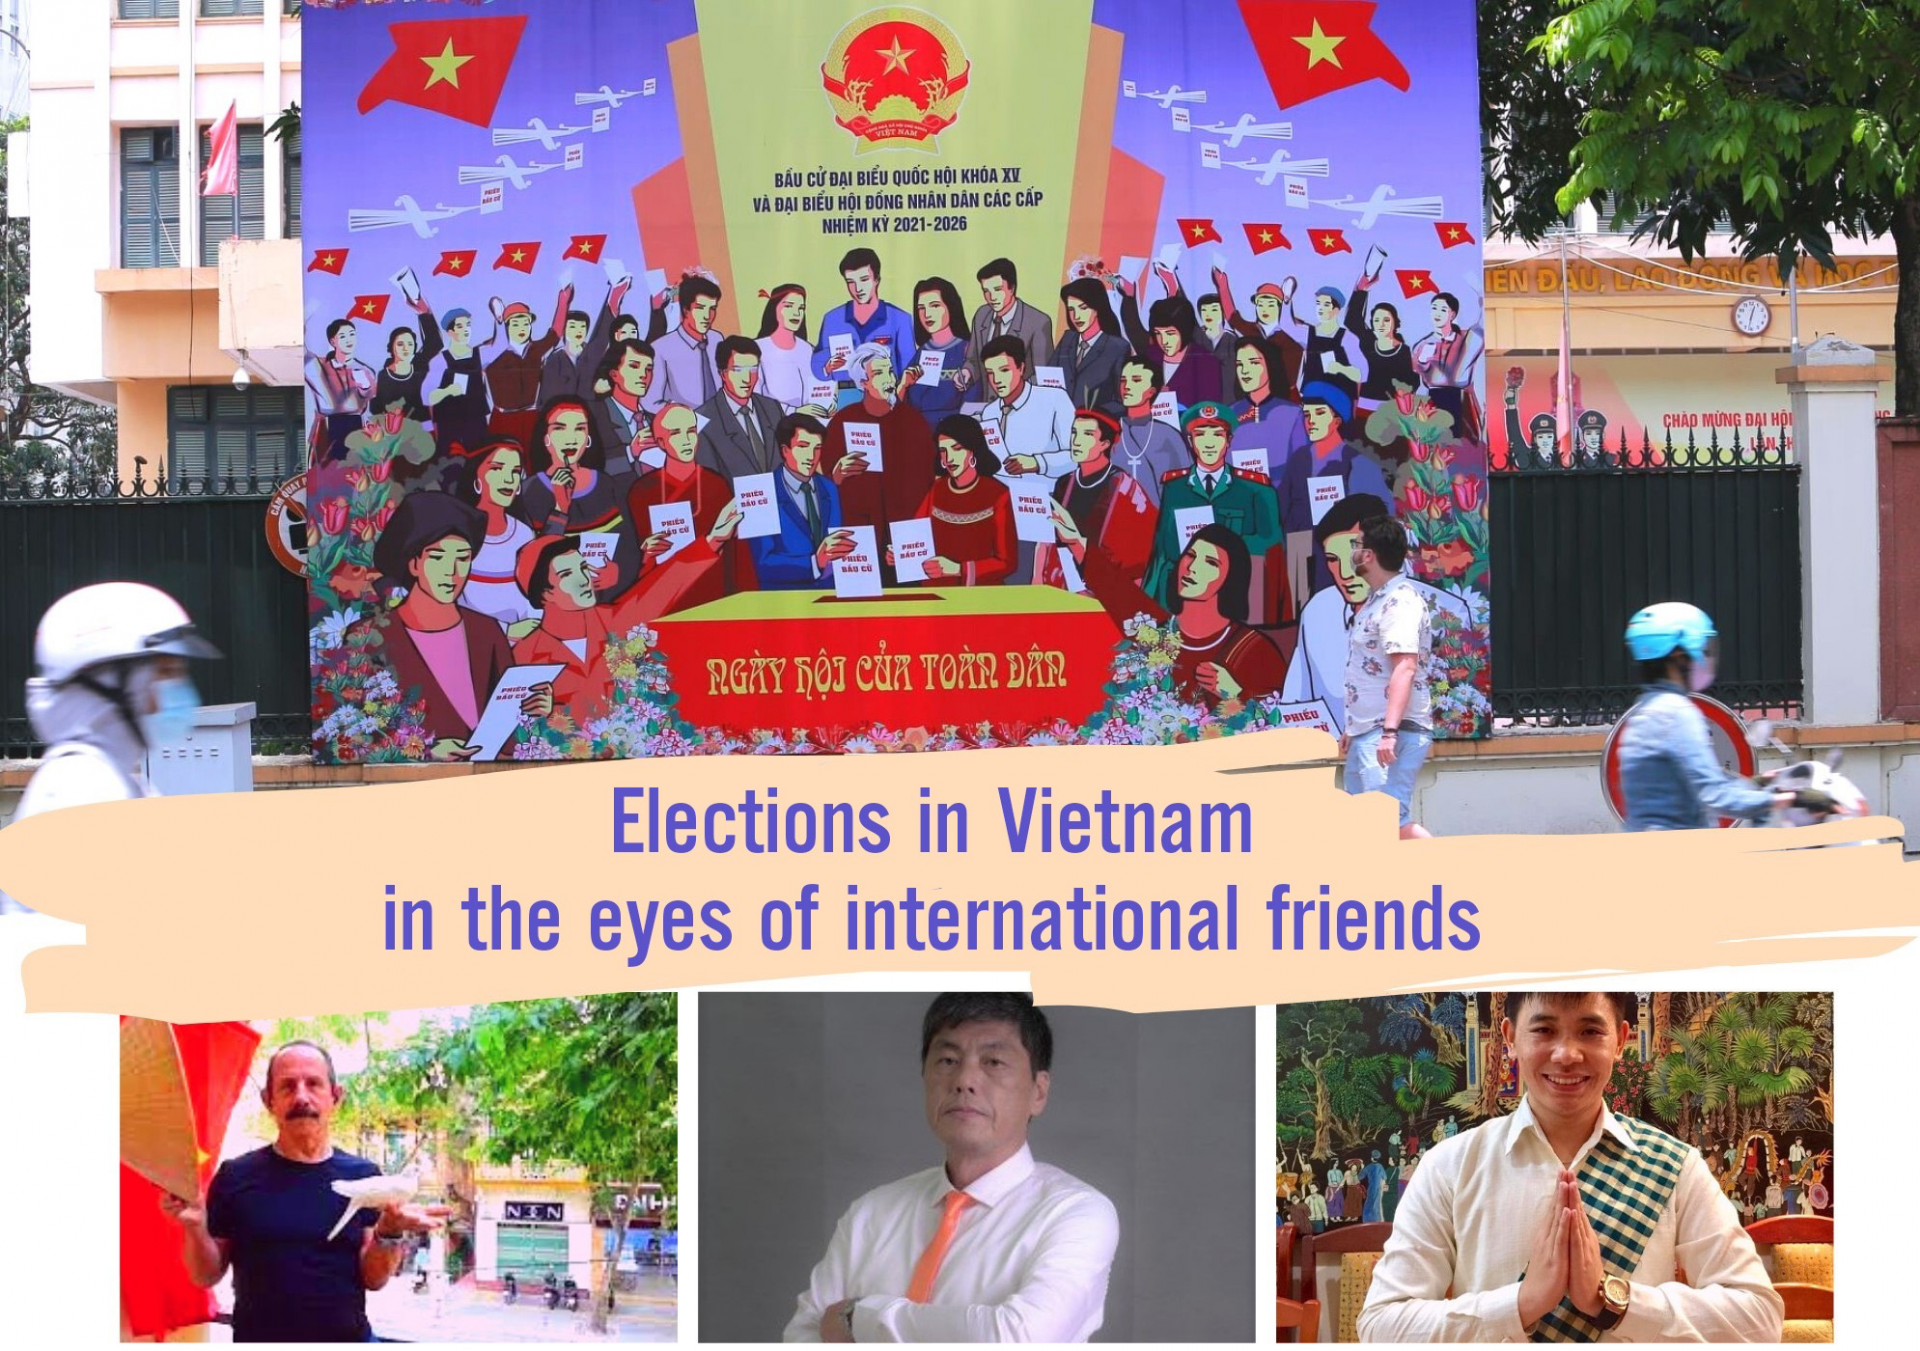 Elections in Vietnam in the eyes of international friends: Bright faith